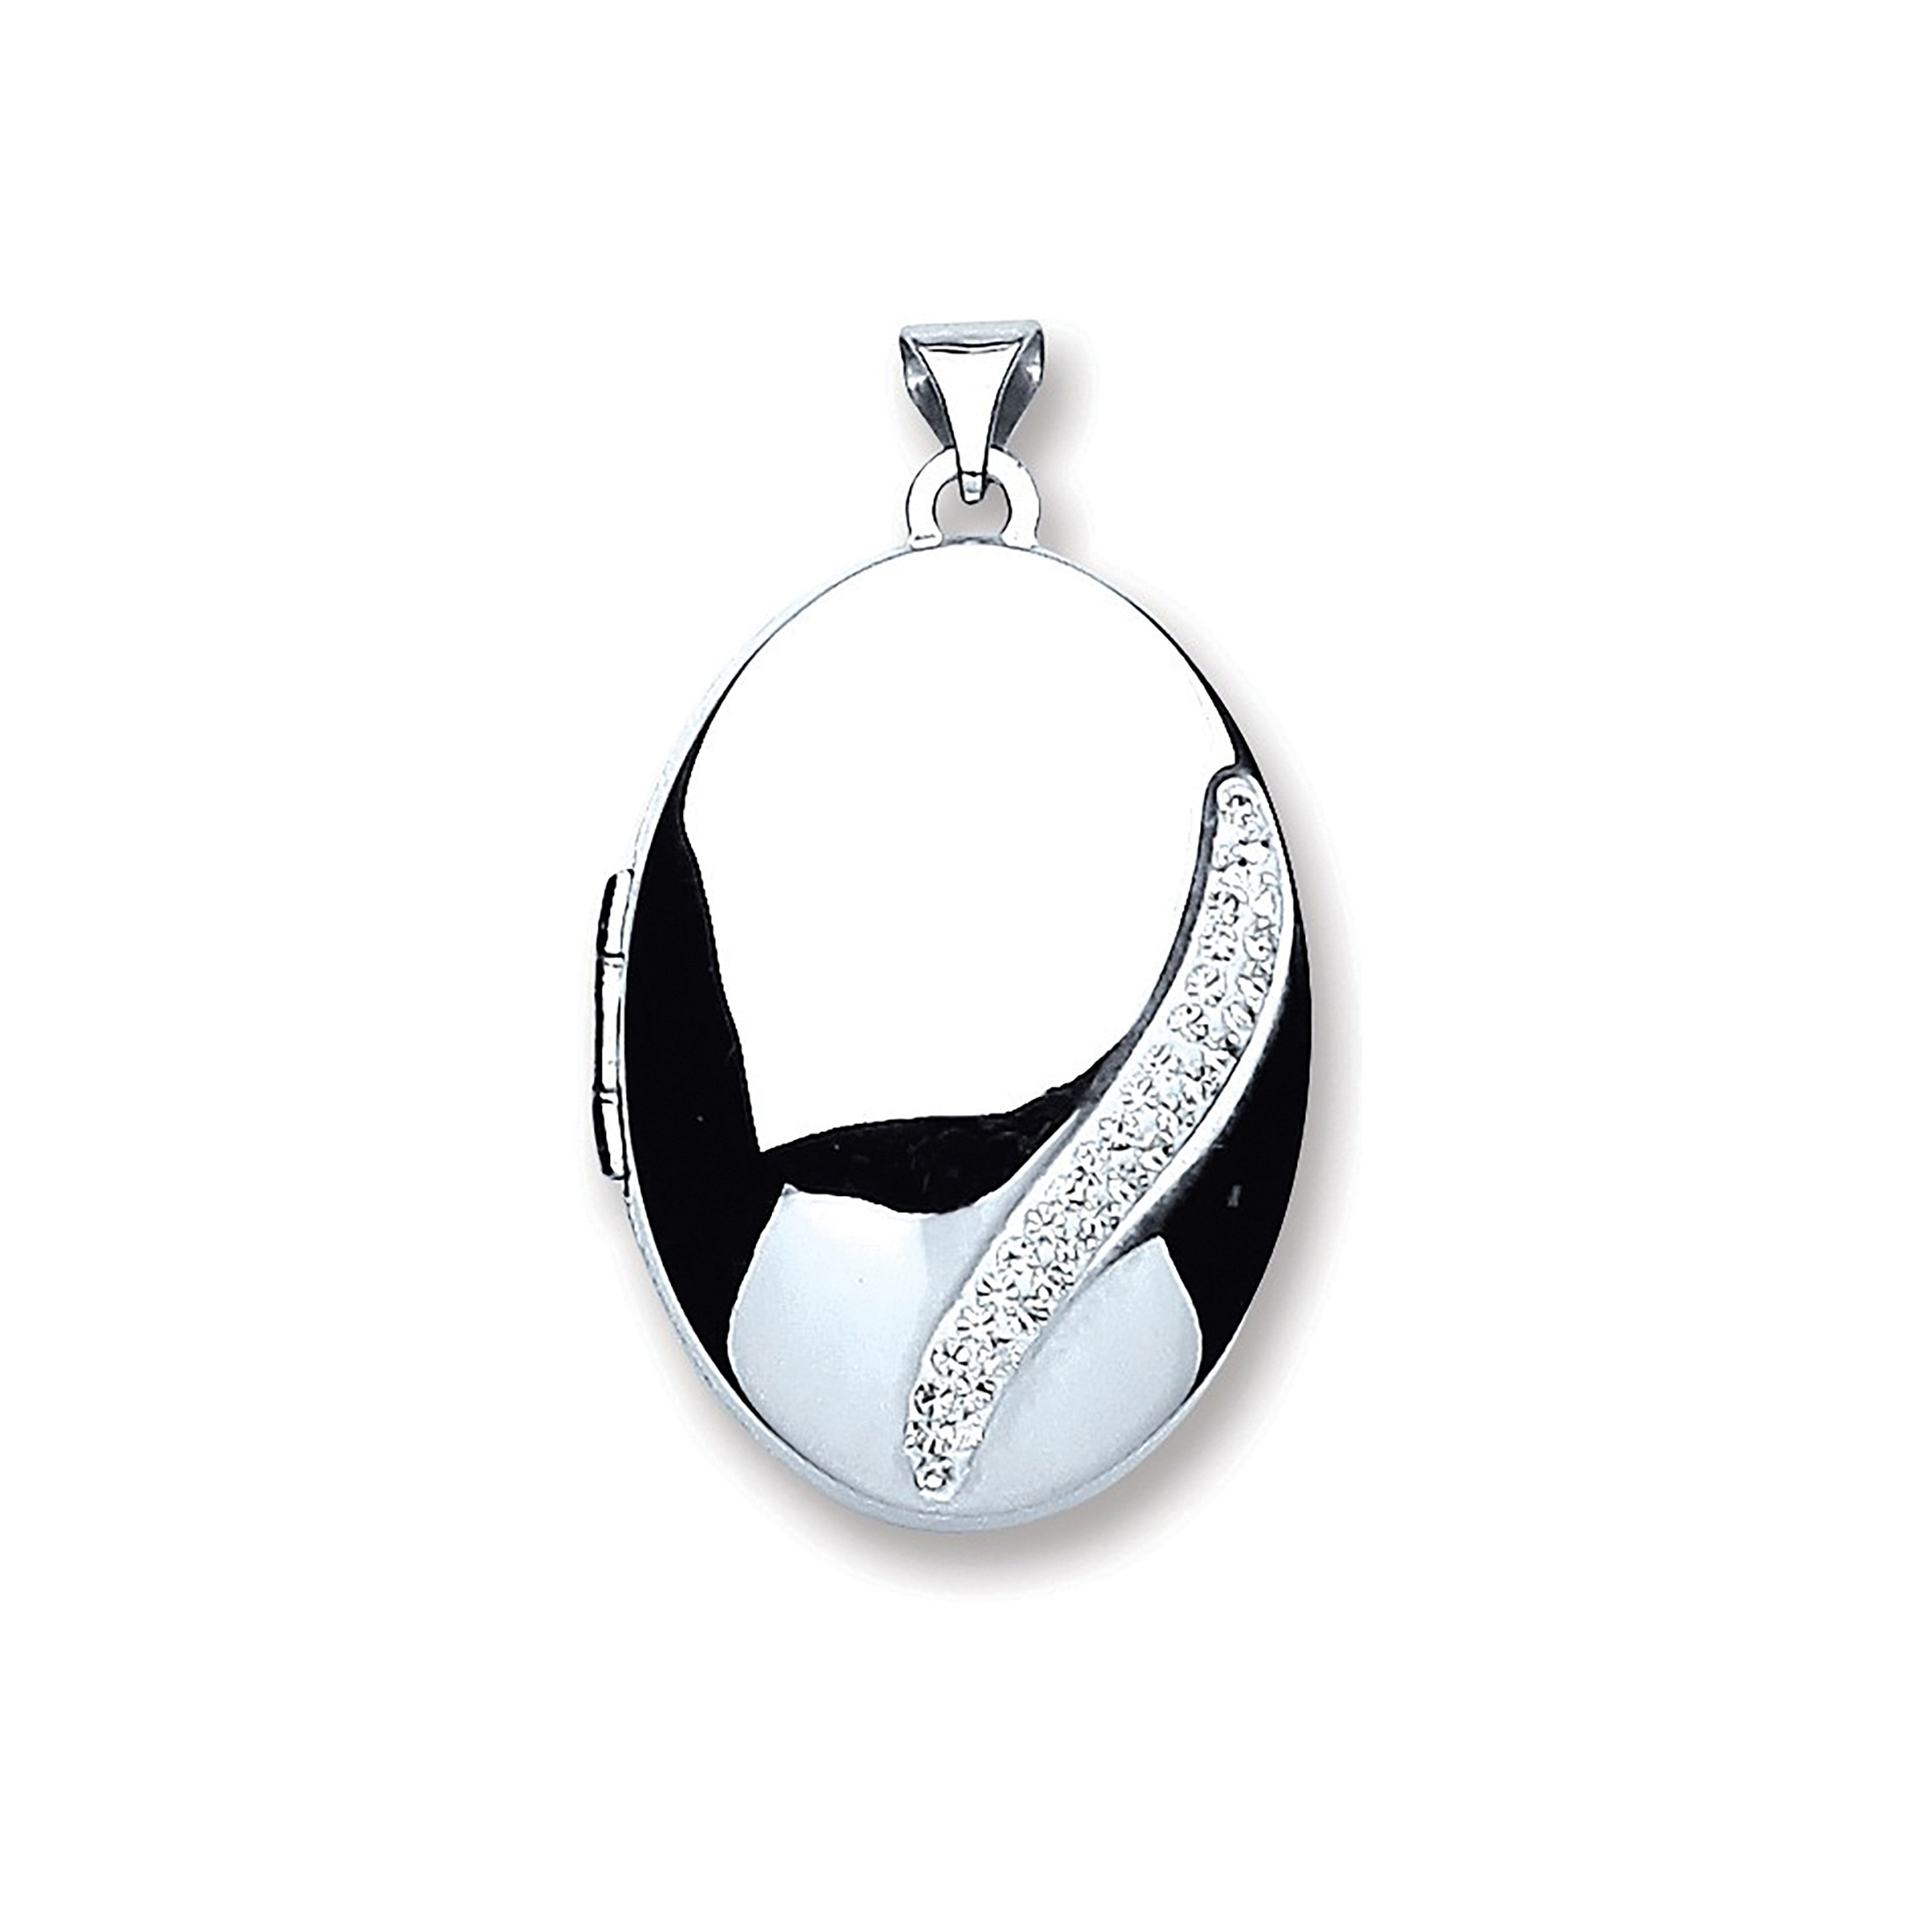 Silver Oval with Crystals Locket - Robert Anthony Jewellers, Edinburgh